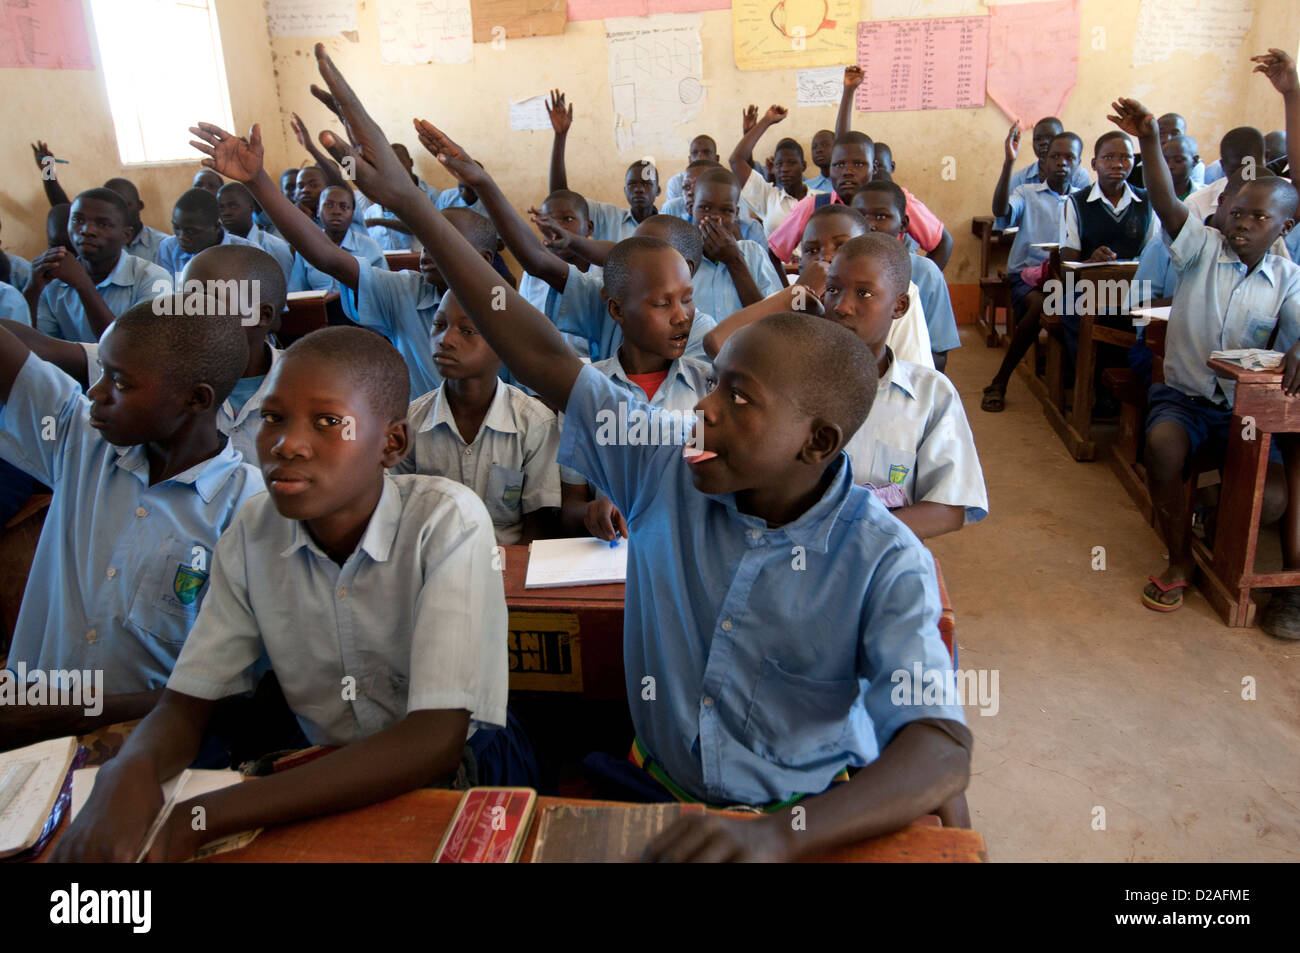 Uganda.Palenga primary school, near Gulu. Classroom of mostly boys with their hands up Stock Photo